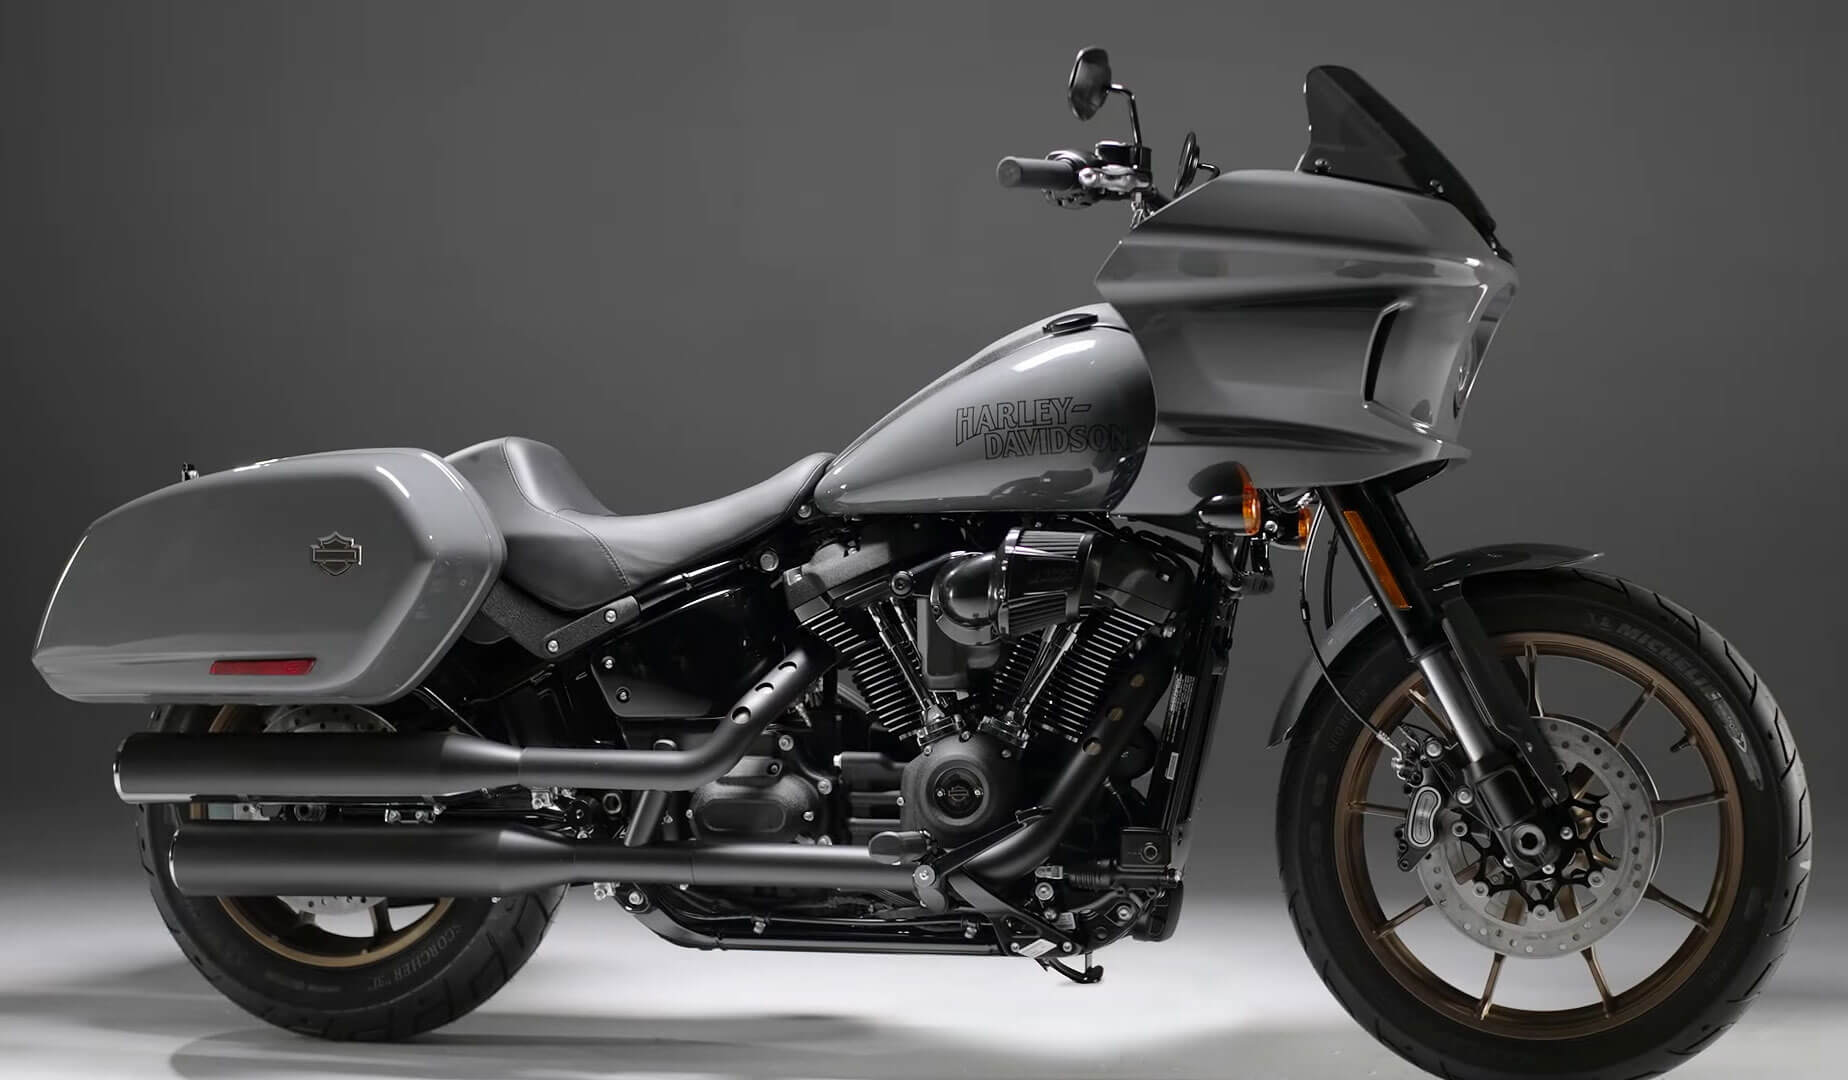 New 2022 Harley Models - Road Glide ST, Street Glide ST and FXLRST